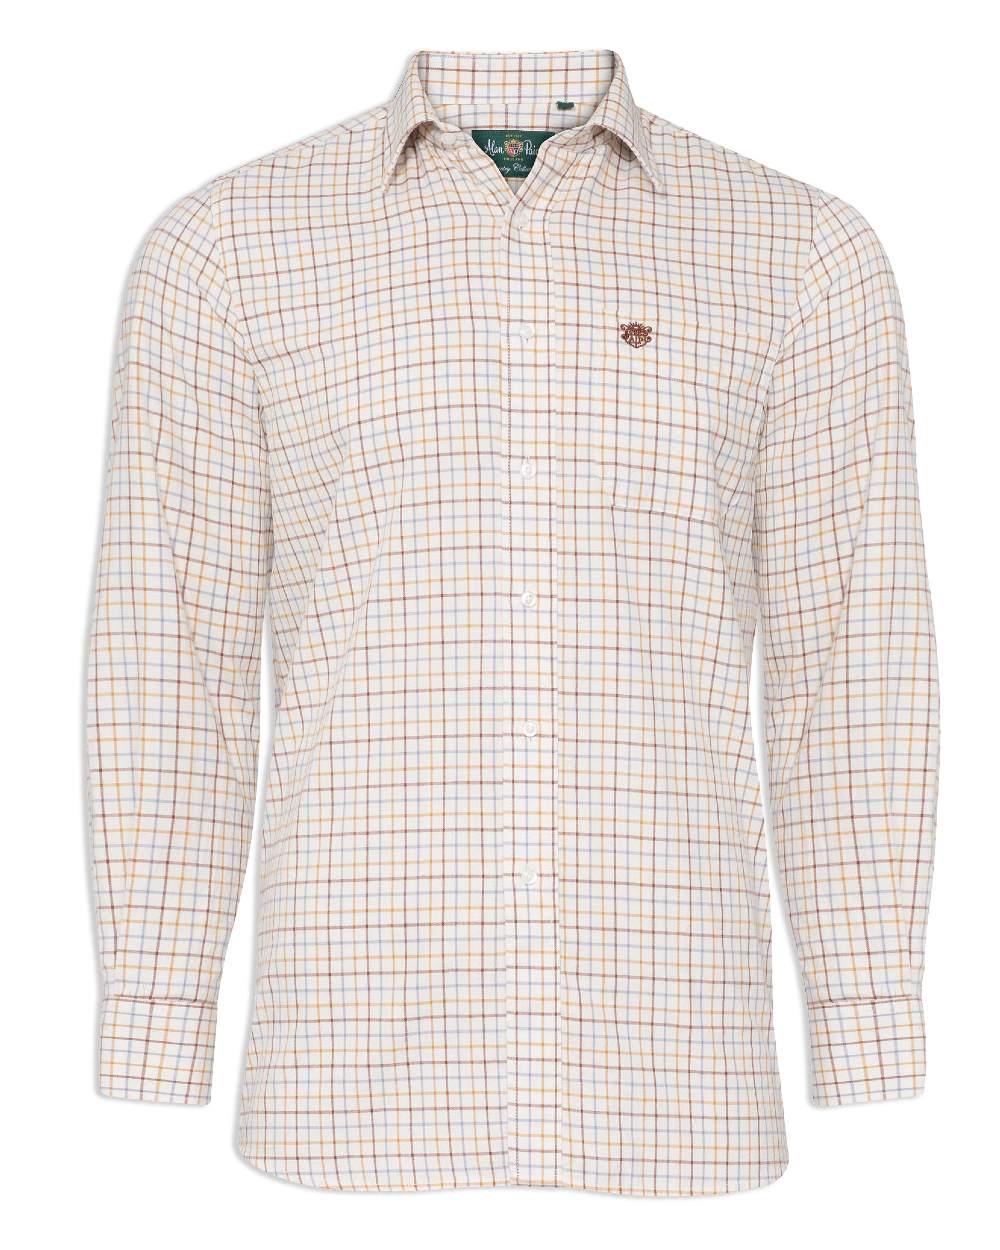 Alan Paine Ilkley Shirt in Brown Check 